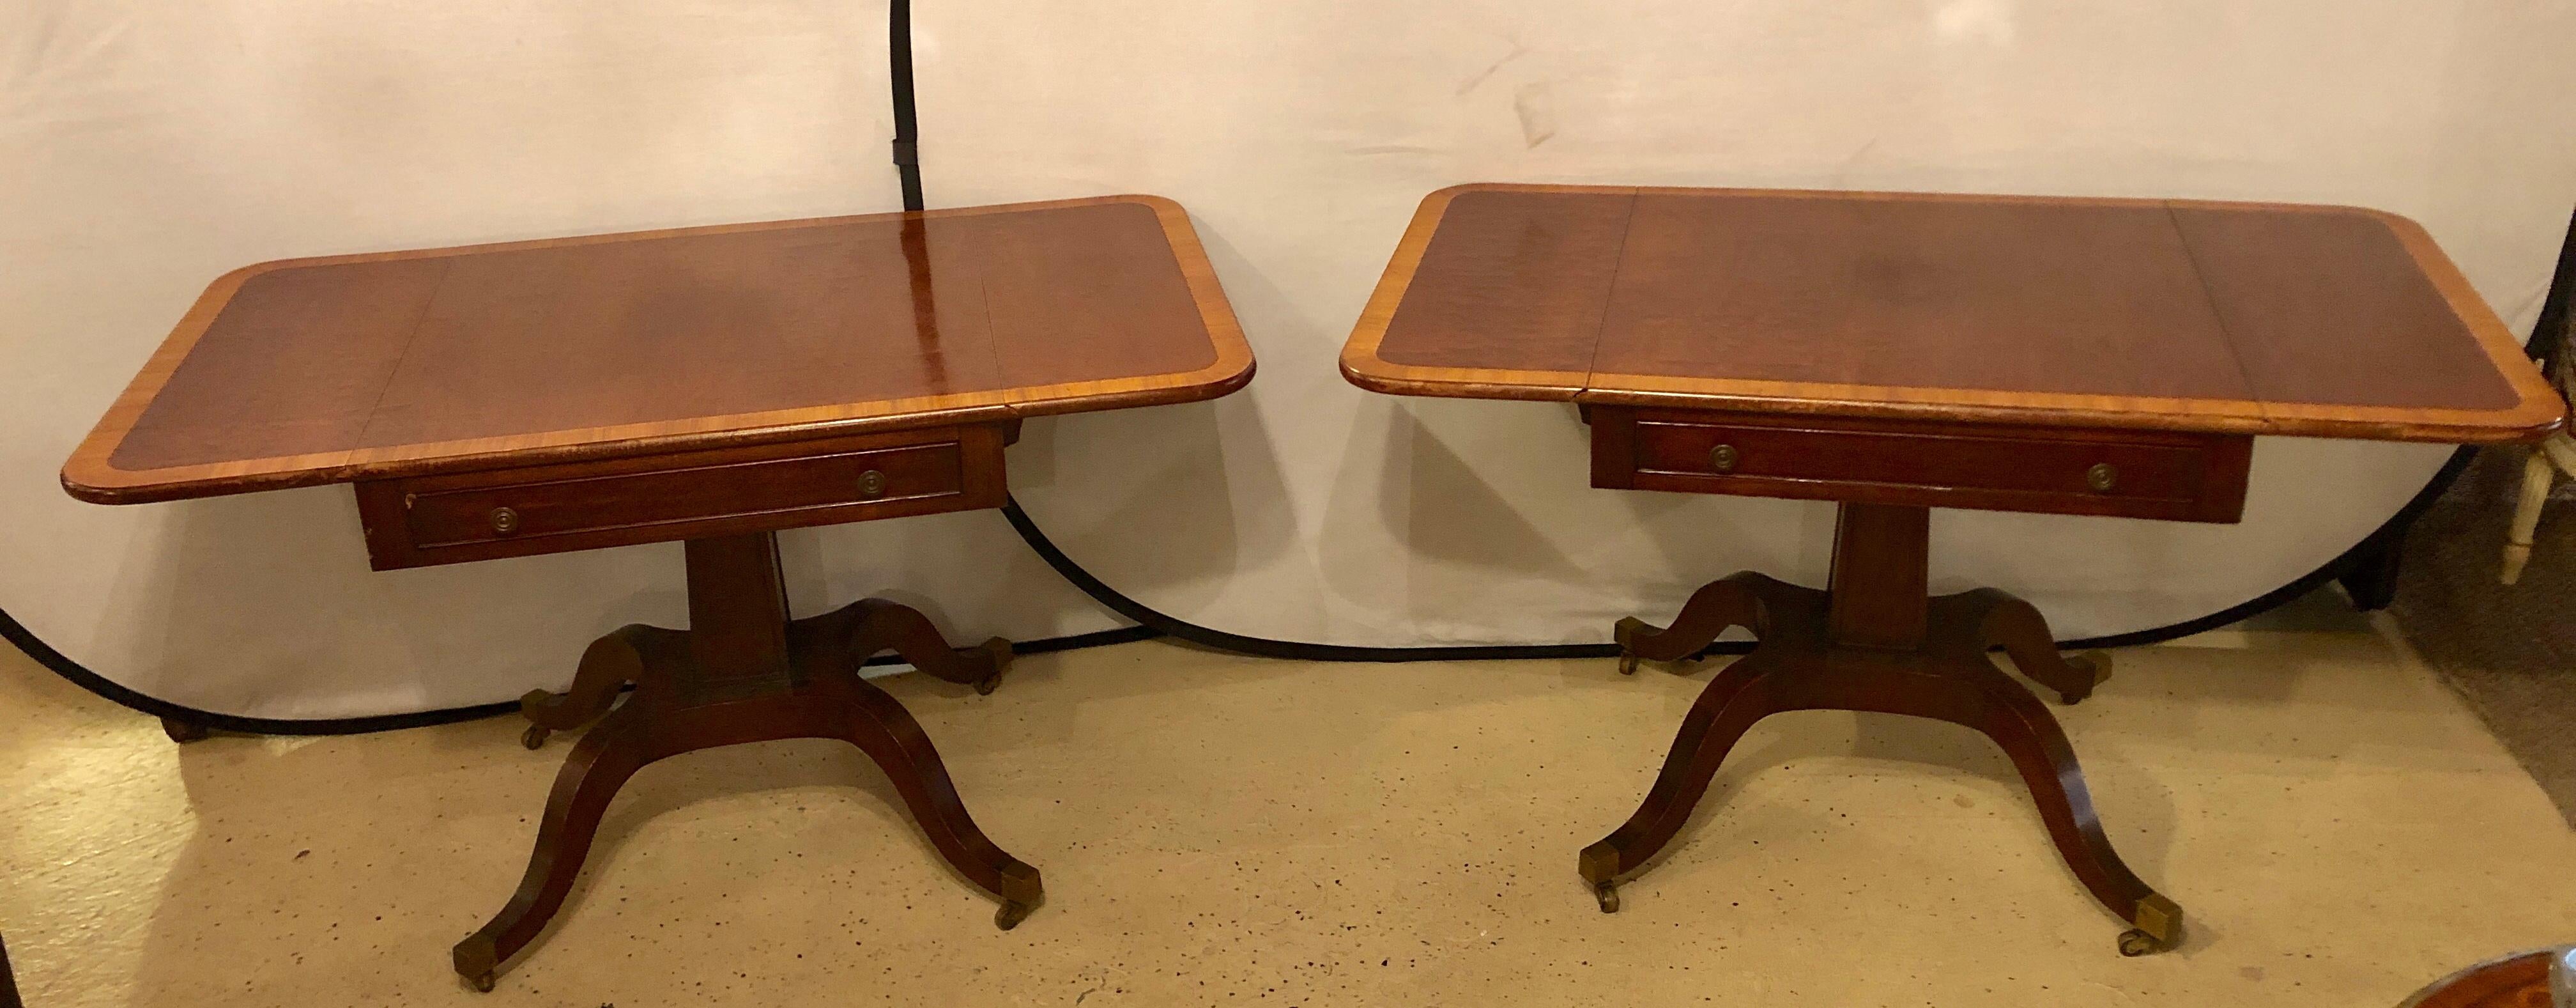 Pair of Schmieg & Kotzian Georgian style drop-leaf sofa or side tables. A fine pair of mahogany top with a satinwood banding along the edges having a single drawer leading to a pedestal quad legged base terminating in bass sabots with casters. These